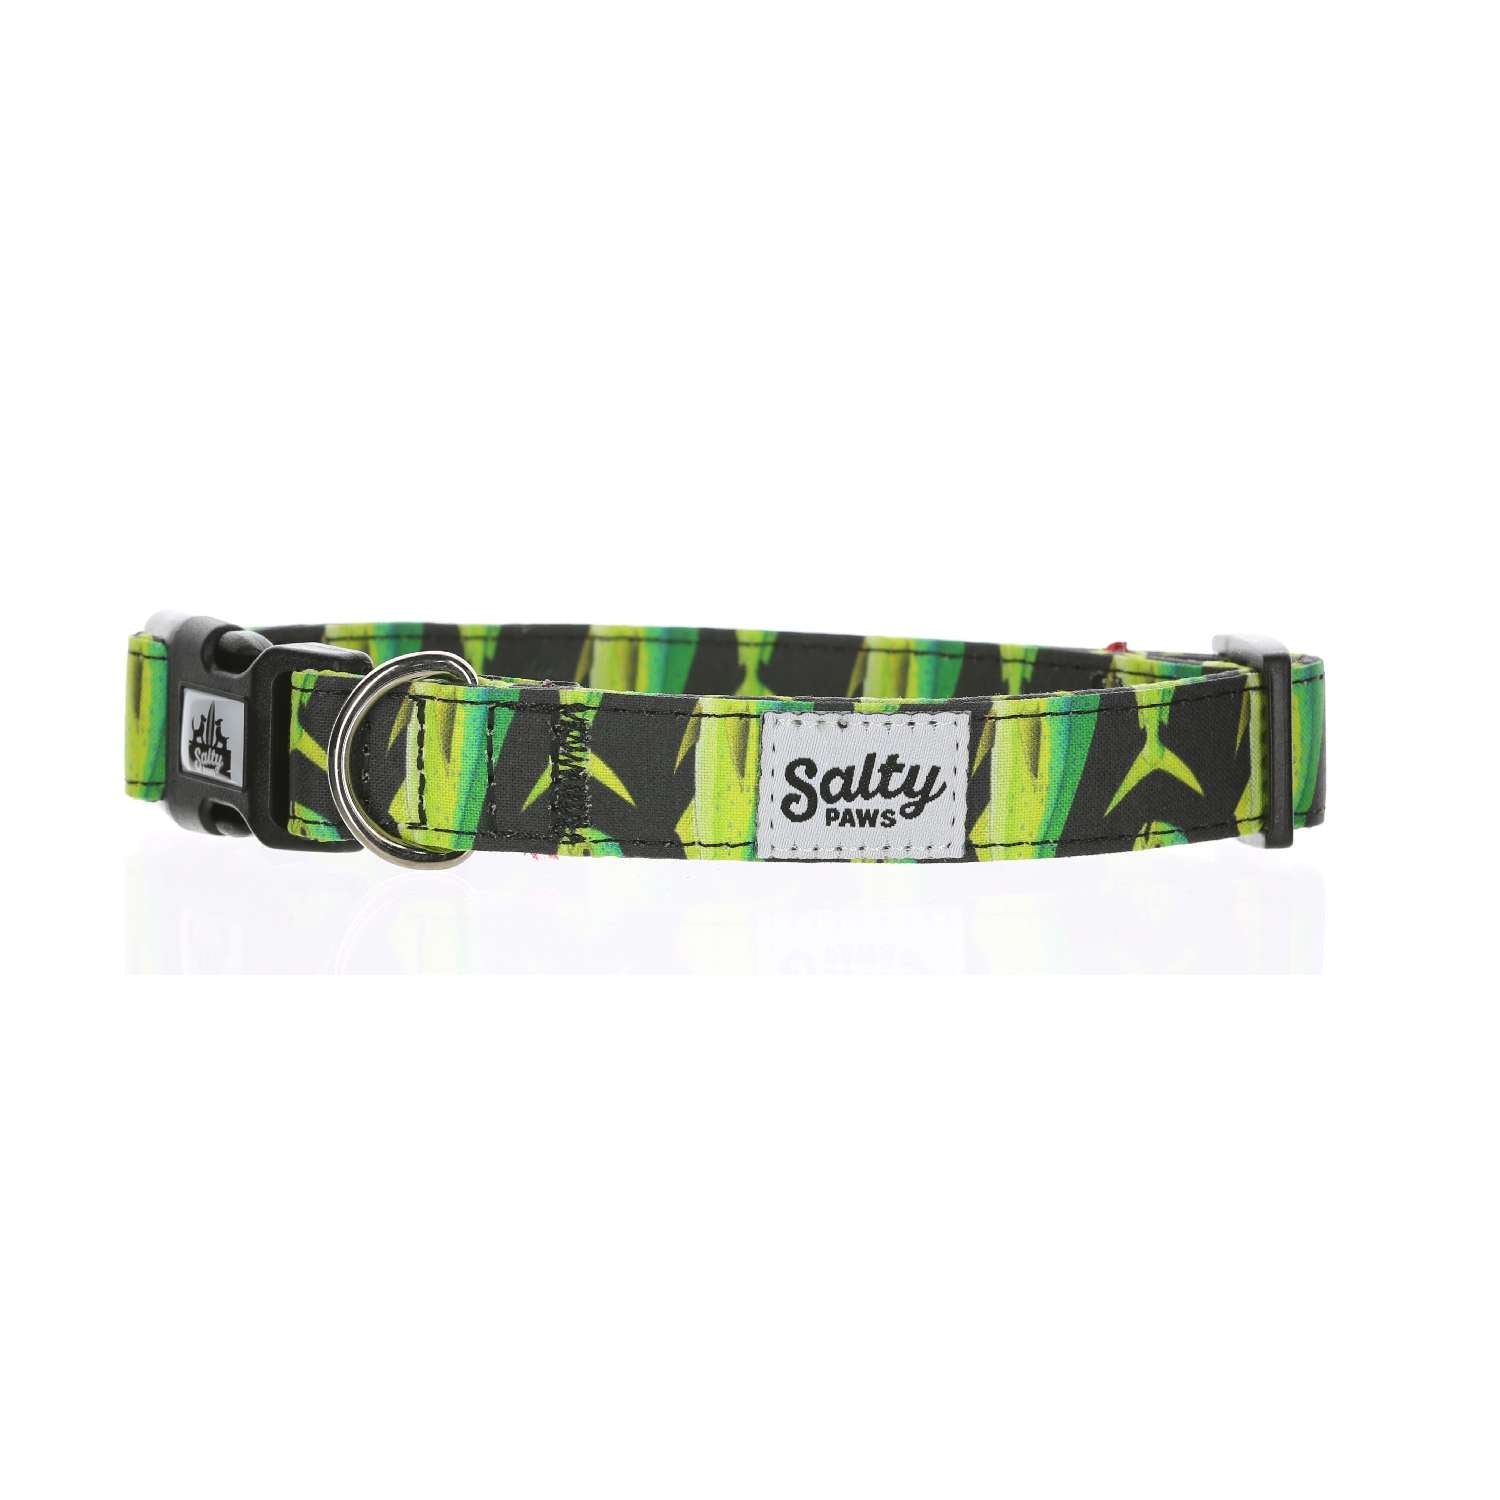 Salty Paws Surfing Dog Collar | Designs for Beach Dogs,  Floral, Fishing, Surfing, Hawaiian,  Black Mahi M